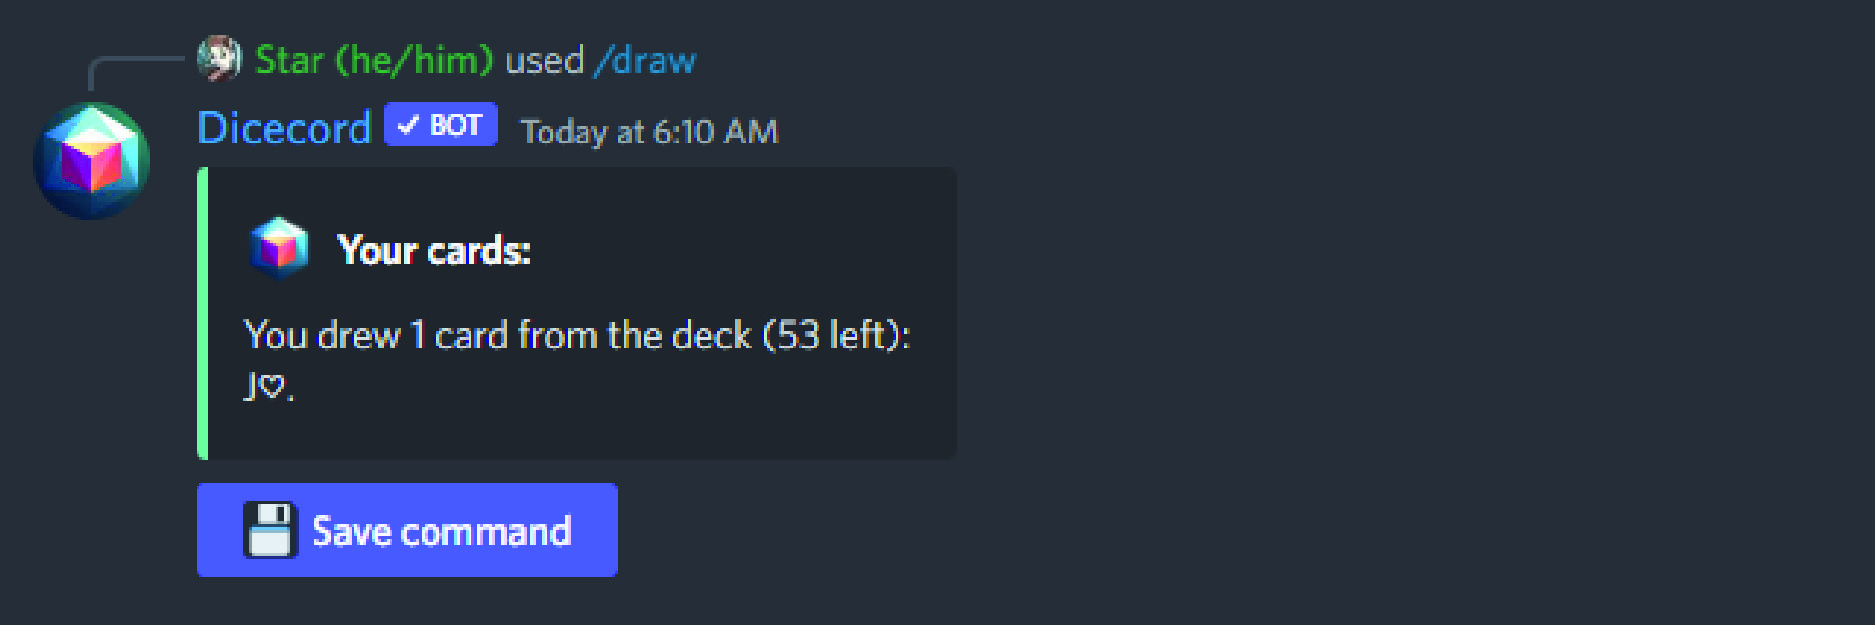 Screenshot of Discord with Dicecord's response to /draw. It reads: You drew 1 card from the deck (53 left): J Hearts, indicating the Jack of Hearts.